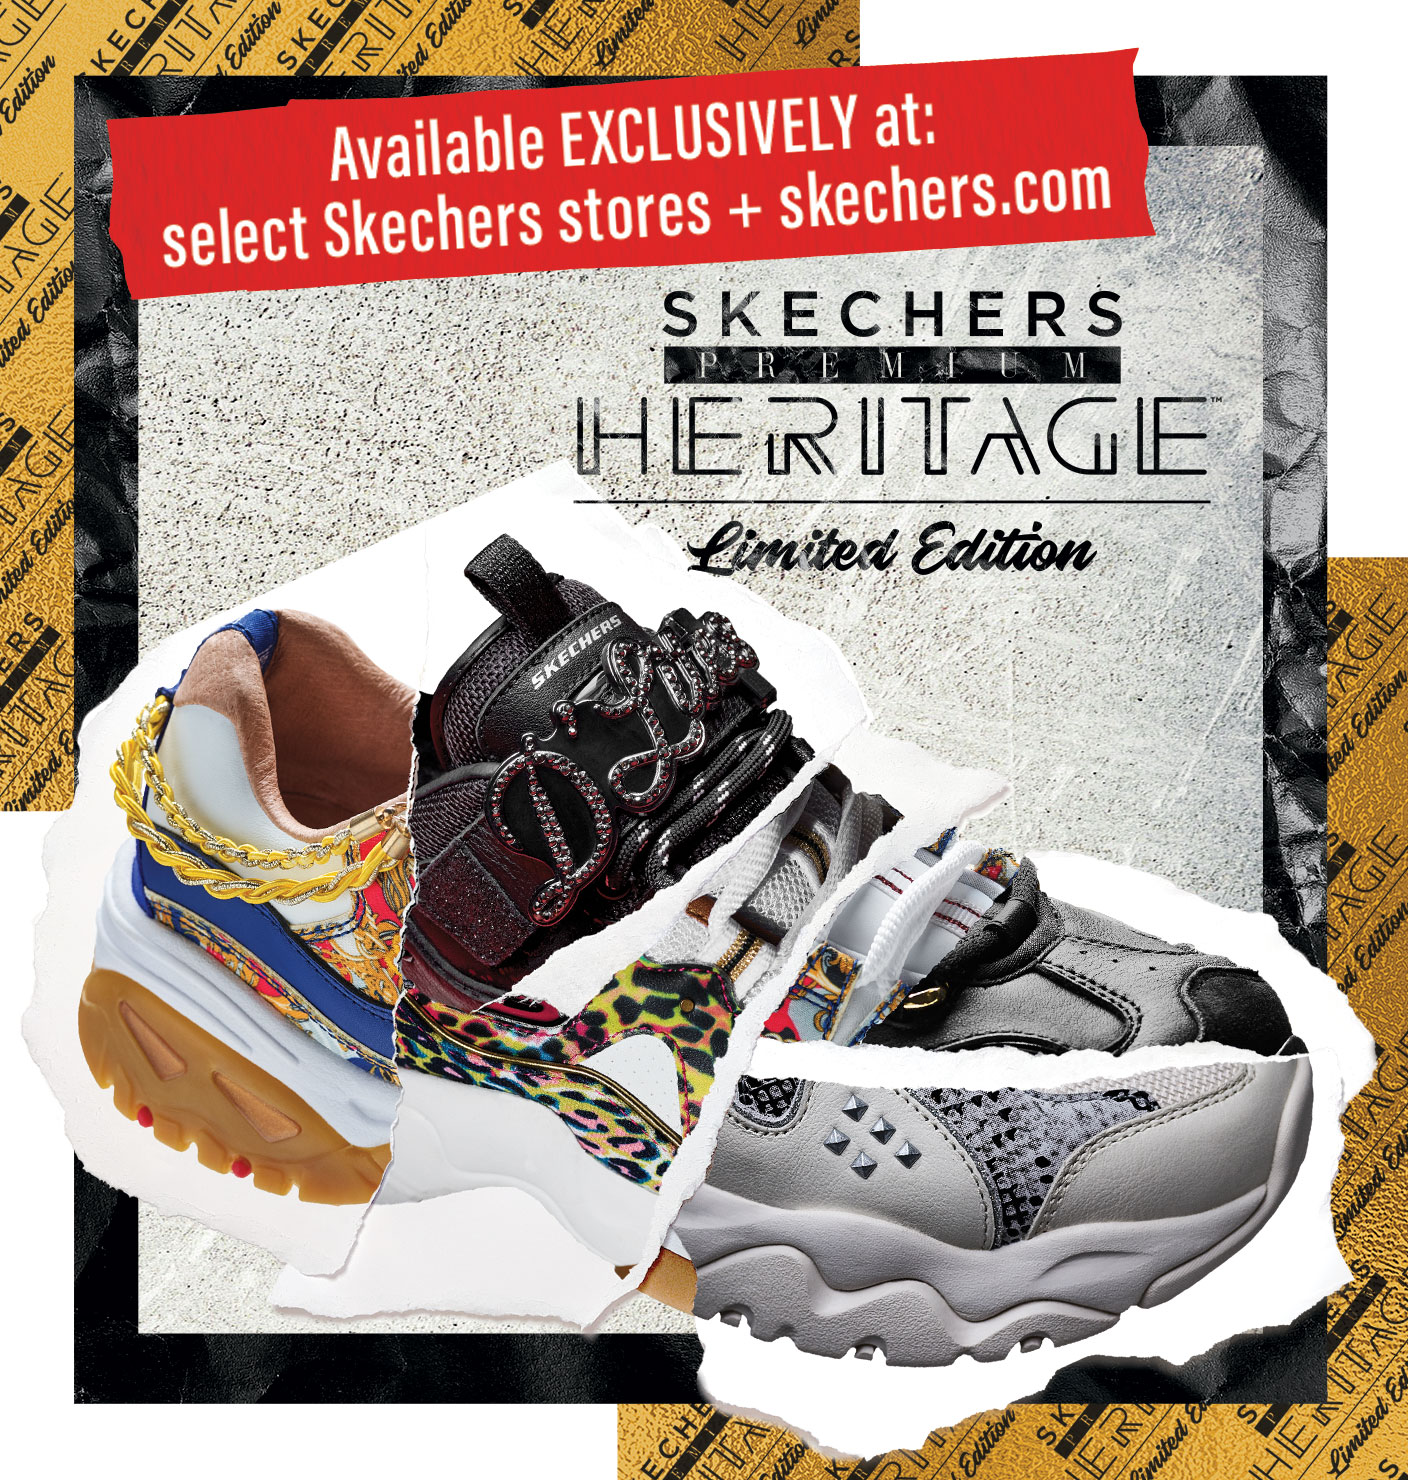 skechers limited edition